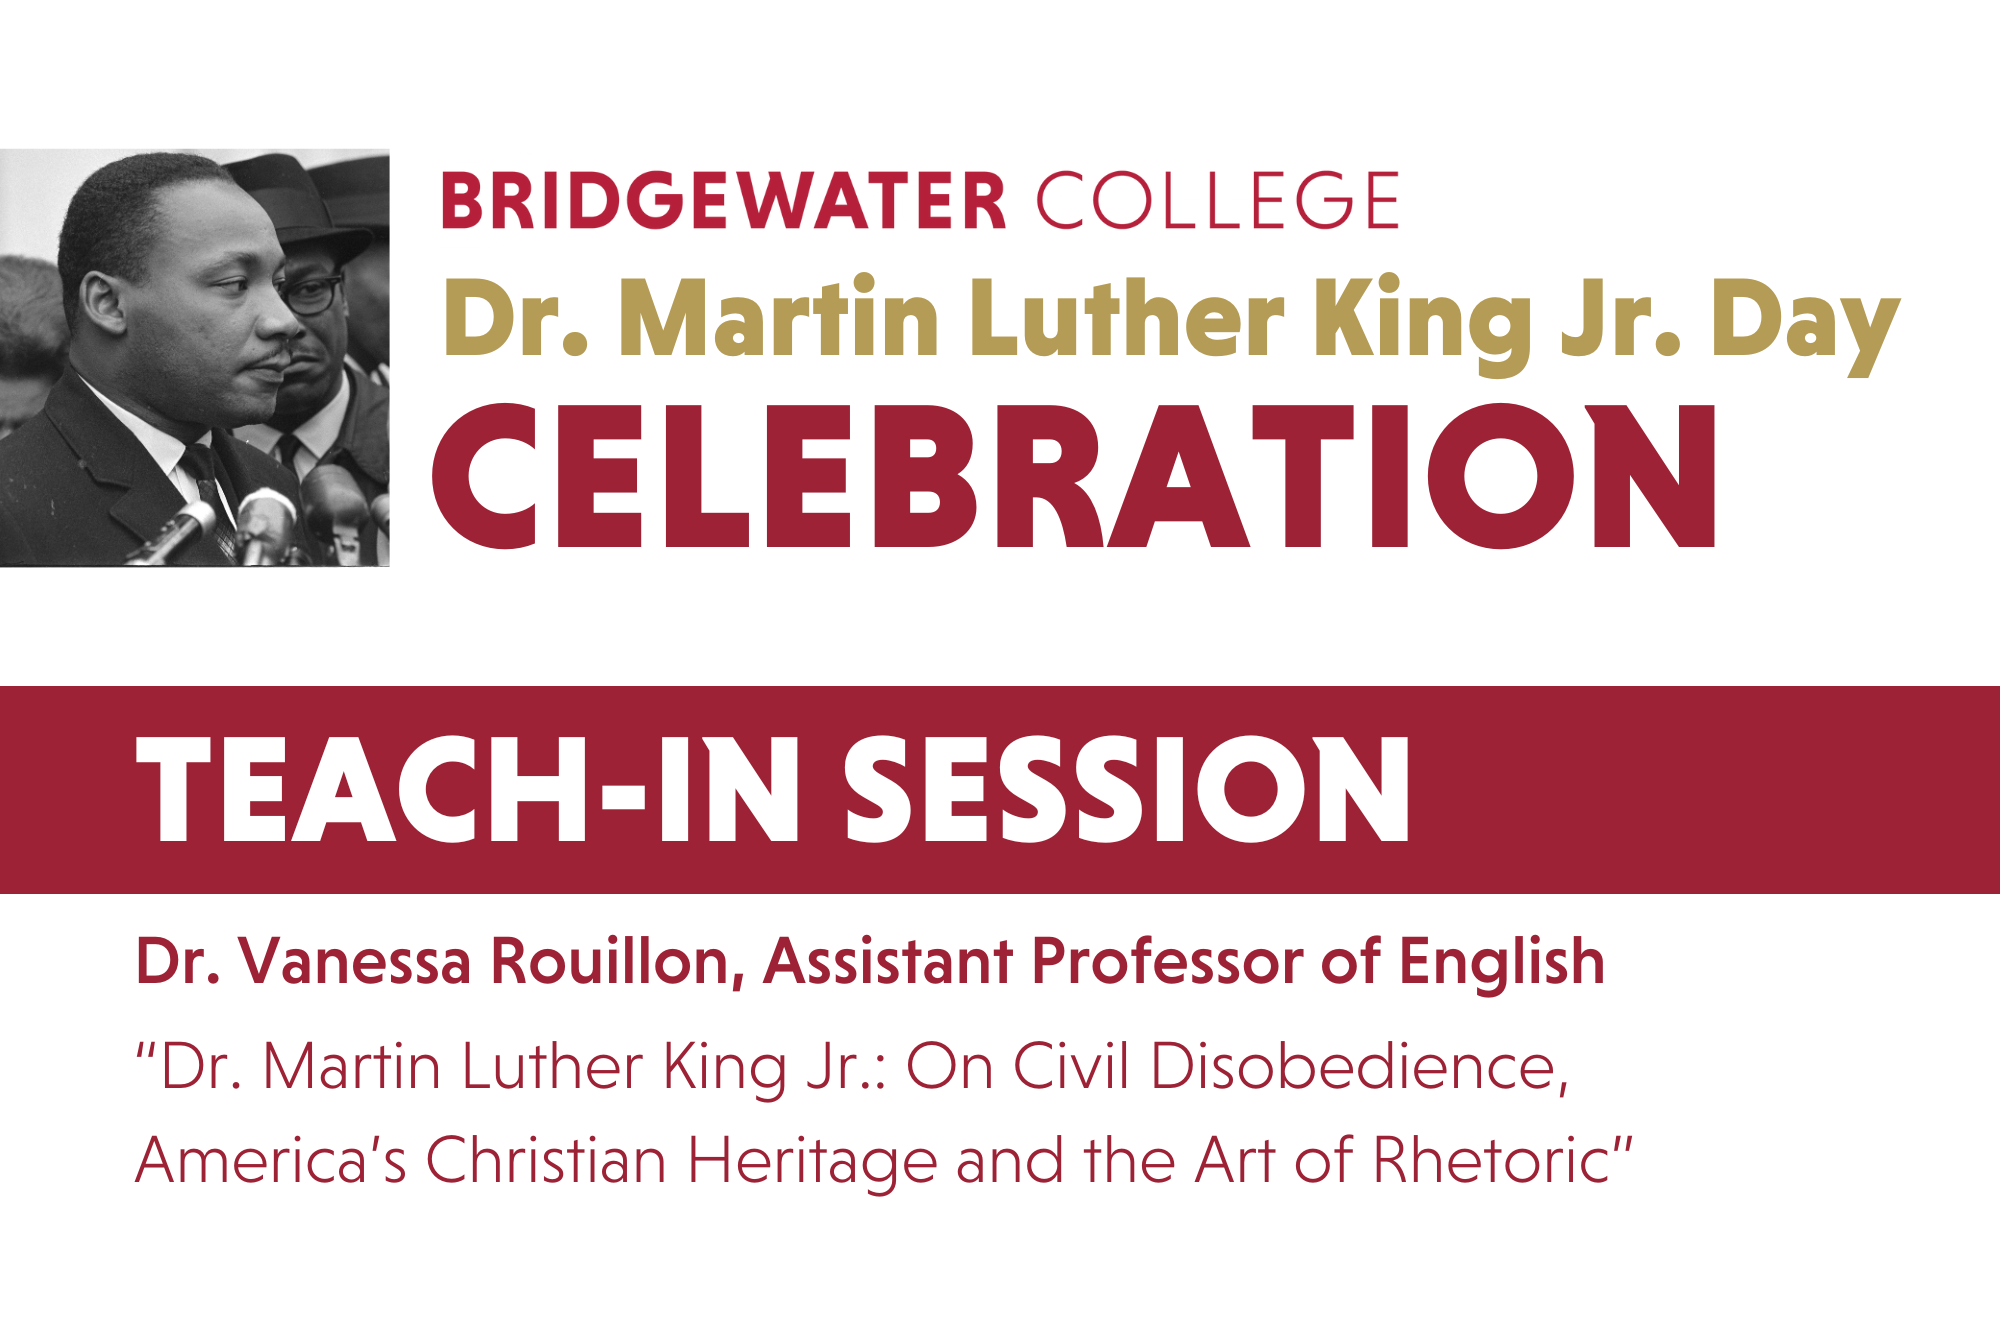 Bridgewater College. Dr. Martin Luther King Jr. Day Celebration. Teach-In Session. Dr. Vanessa Rouillon, Assistant Professor of English. "Dr. Martin Luther King Jr.: On Civil Disobedience, America's Christian Heritage and the Art of Rhetoric."